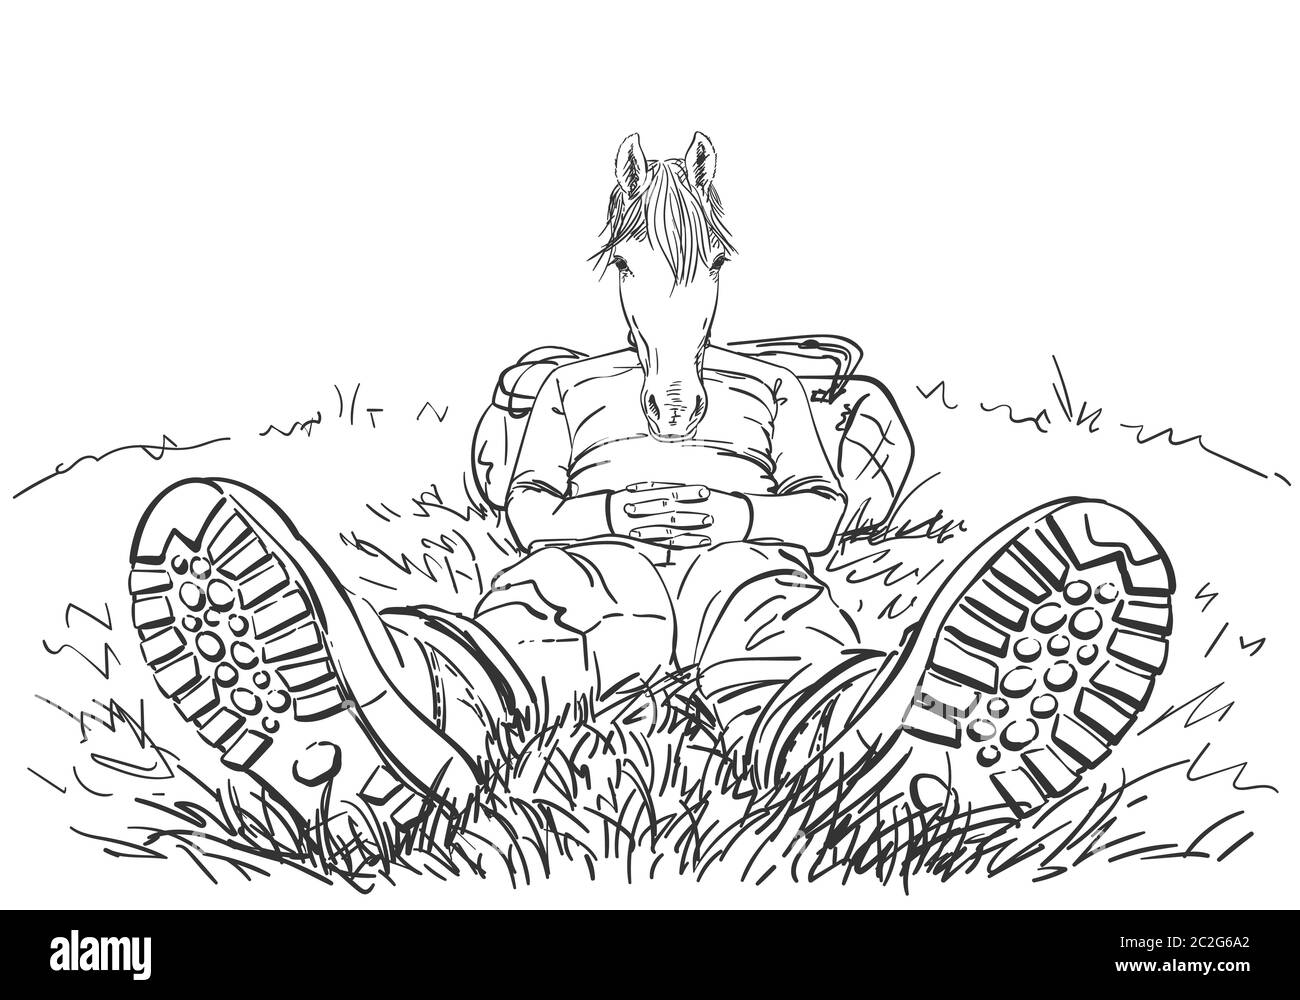 High perspective drawing of hiker with horse head sitting outdoor on ground, with legs in trekking boots, stretched forward, and with back rested on b Stock Vector